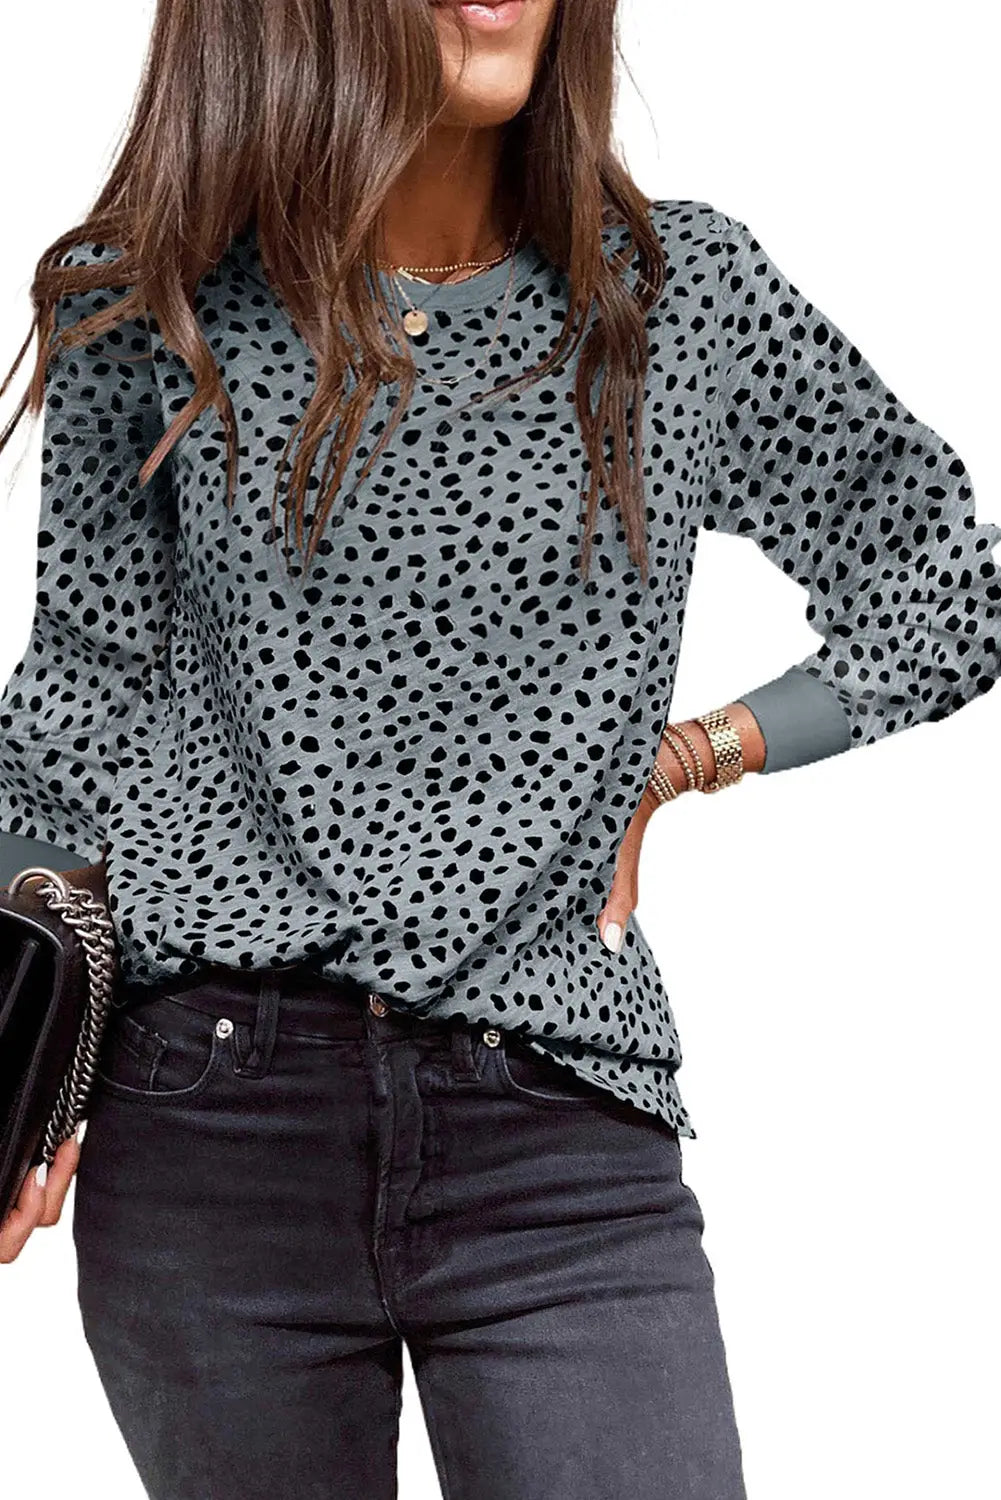 Animal Spotted Print Round Neck Long Sleeve Top-79